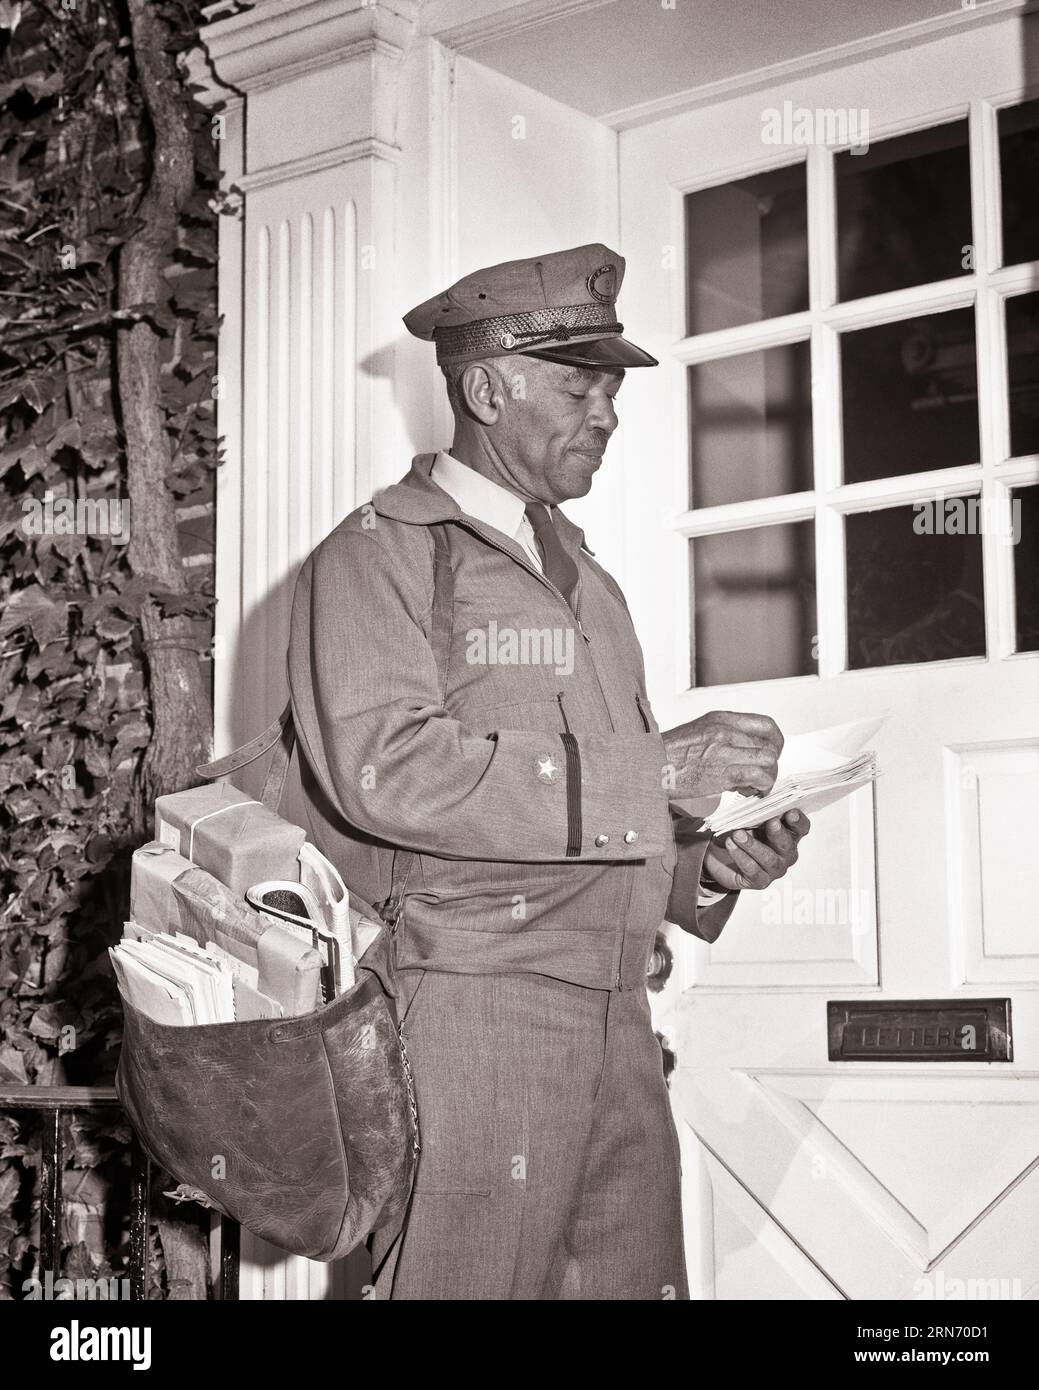 1960s PORTRAIT OF AFRICAN-AMERICAN MAILMAN USPS MAN WEARING UNIFORM DELIVERING MAIL TO DOOR CARRYING MAIL BAG ON HIS SHOULDER - p7193 HAR001 HARS PERSONS POSTAL UNITED STATES OF AMERICA MALES PROFESSION B&W NORTH AMERICA DELIVERING NORTH AMERICAN SKILL OCCUPATION SKILLS HIS CUSTOMER SERVICE AFRICAN-AMERICANS AFRICAN-AMERICAN CAREERS BLACK ETHNICITY LABOR EMPLOYMENT OCCUPATIONS MAILING CONCEPTUAL MAILMAN INFRASTRUCTURE EMPLOYEE USPS MID-ADULT MID-ADULT MAN UNITED STATES POSTAL SERVICE BLACK AND WHITE HAR001 LABORING OLD FASHIONED AFRICAN AMERICANS Stock Photo